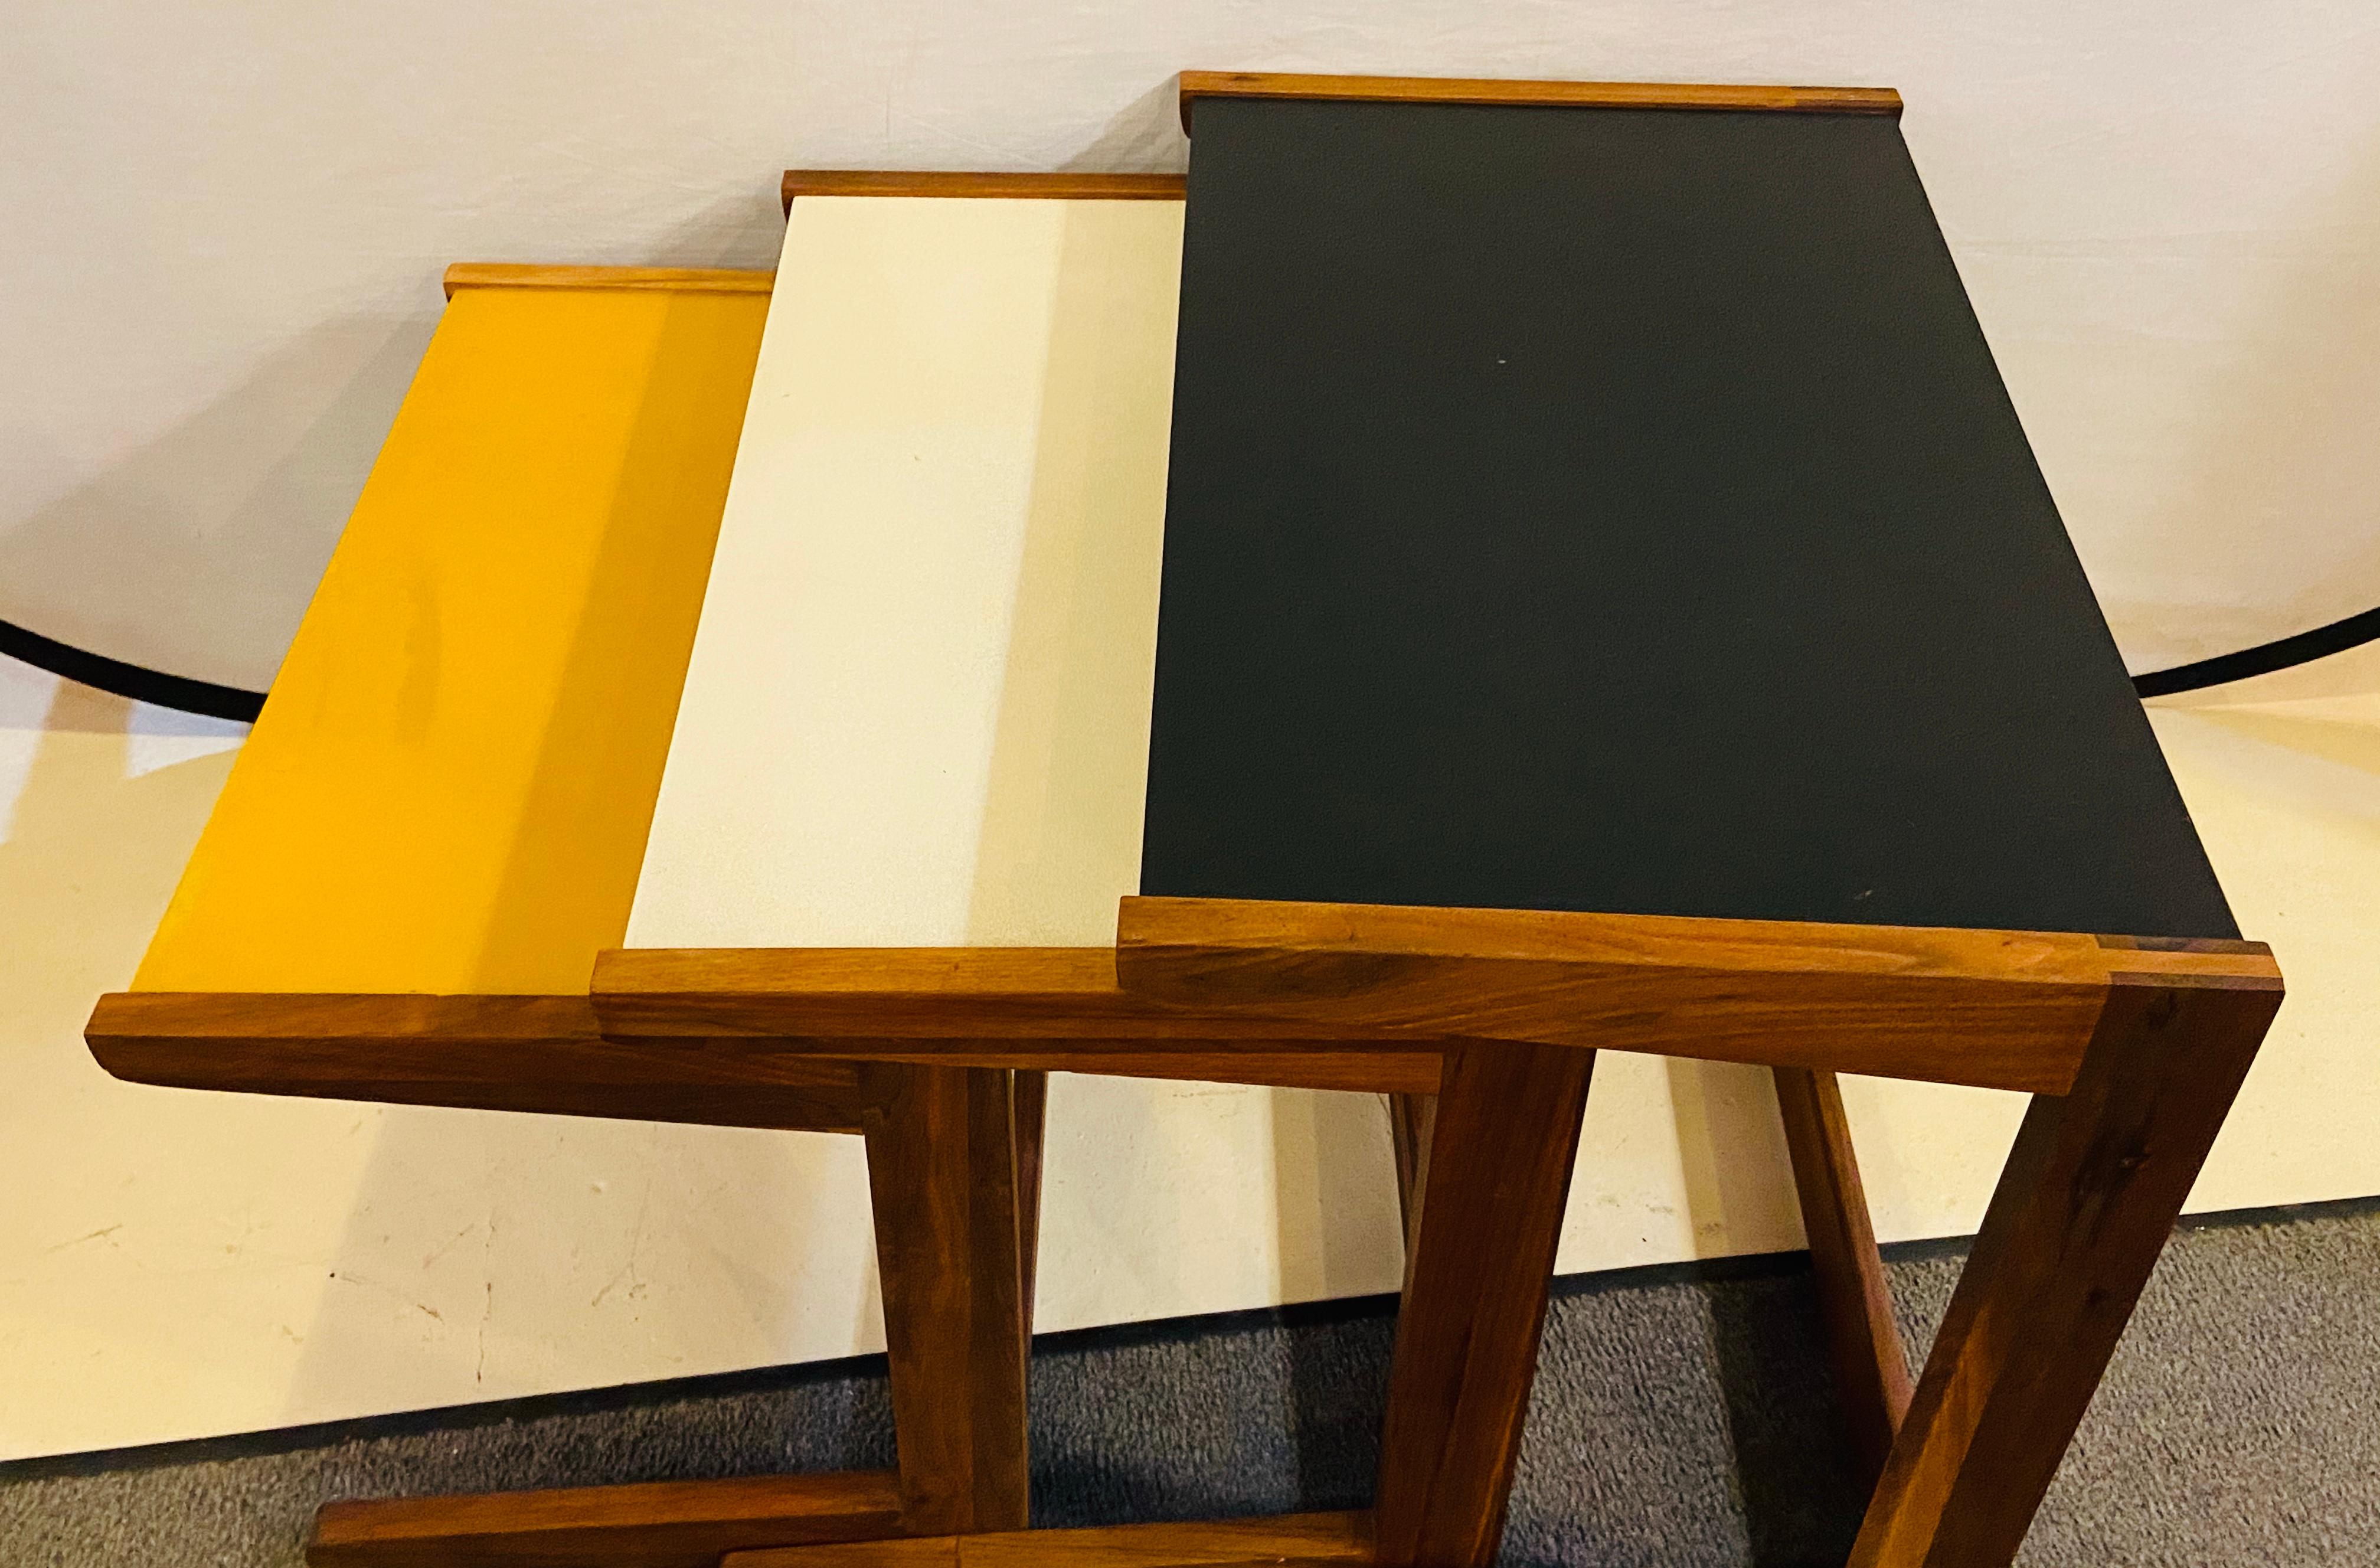 A set of three Mid-Century Modern walnut vinyl nesting side tables by Jens Risom. The stylish nesting tables are made of walnut and vinyl in while, yellow and black. A beautiful addition to your living room or any living area.

Size: Large 26.37